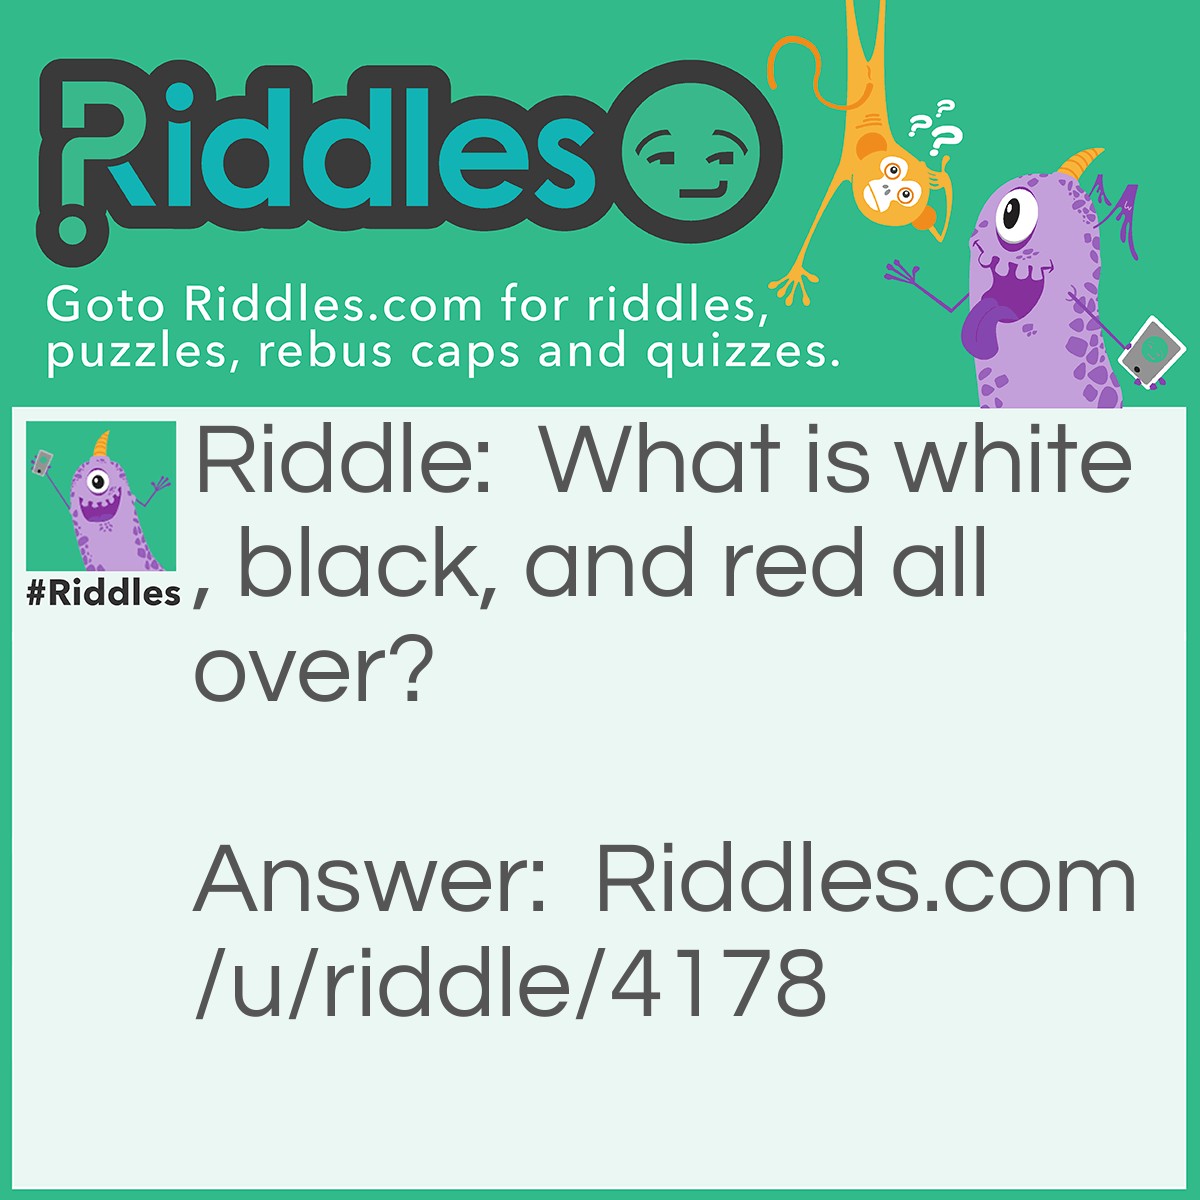 Riddle: What is white, black, and red all over? Answer: A skunk with a diaper rash! A zebra with a sunburn! A panda eating berries! Or a newspaper, whatever.